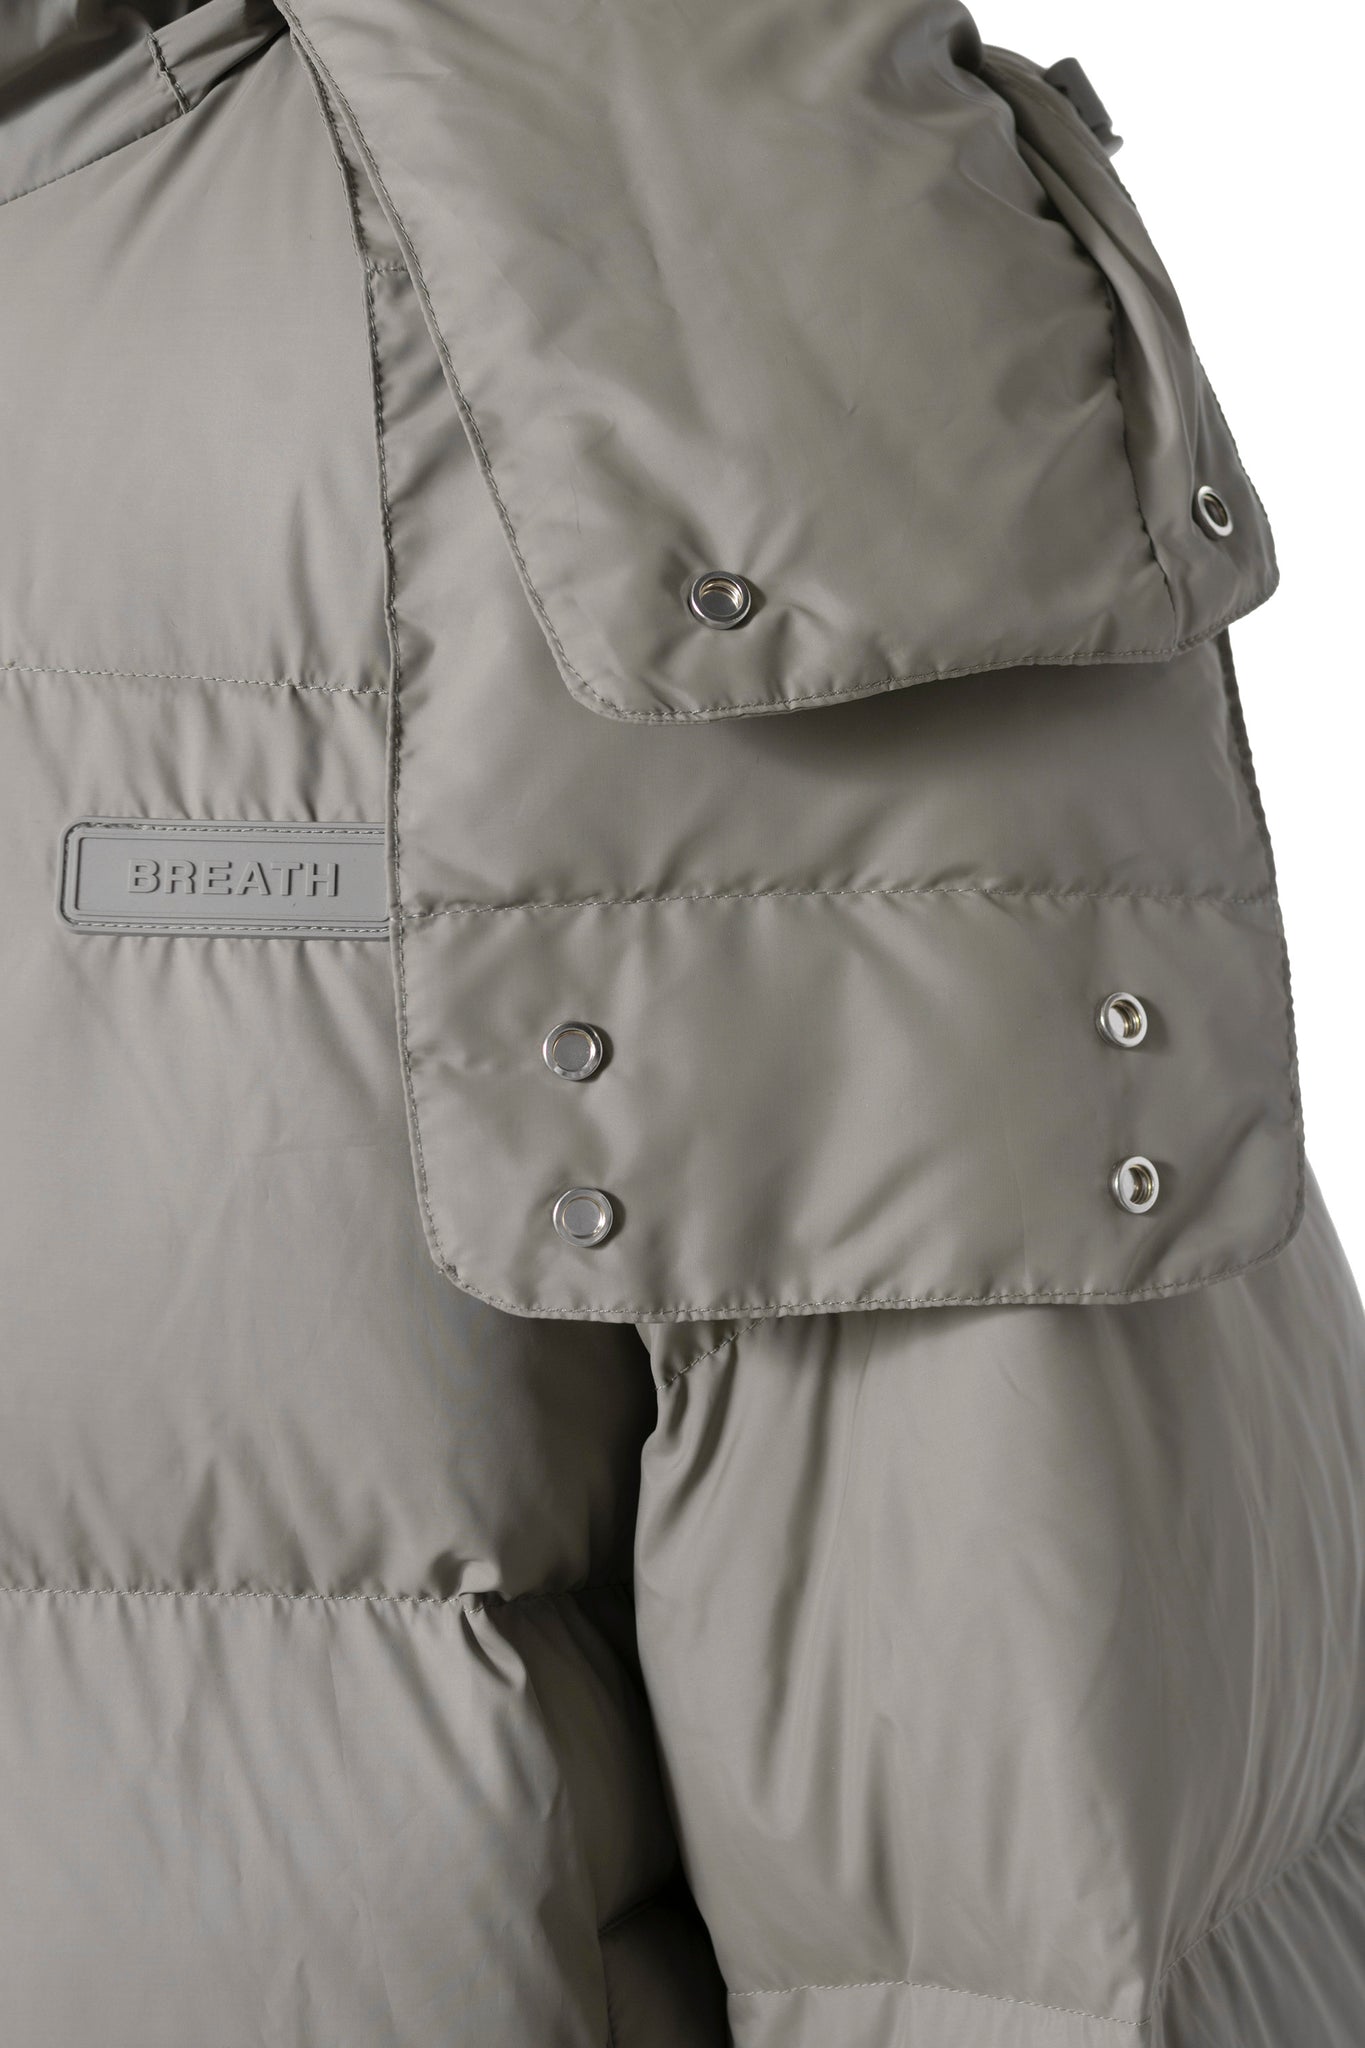 OVER SIZE DOWN JACKET / BEI